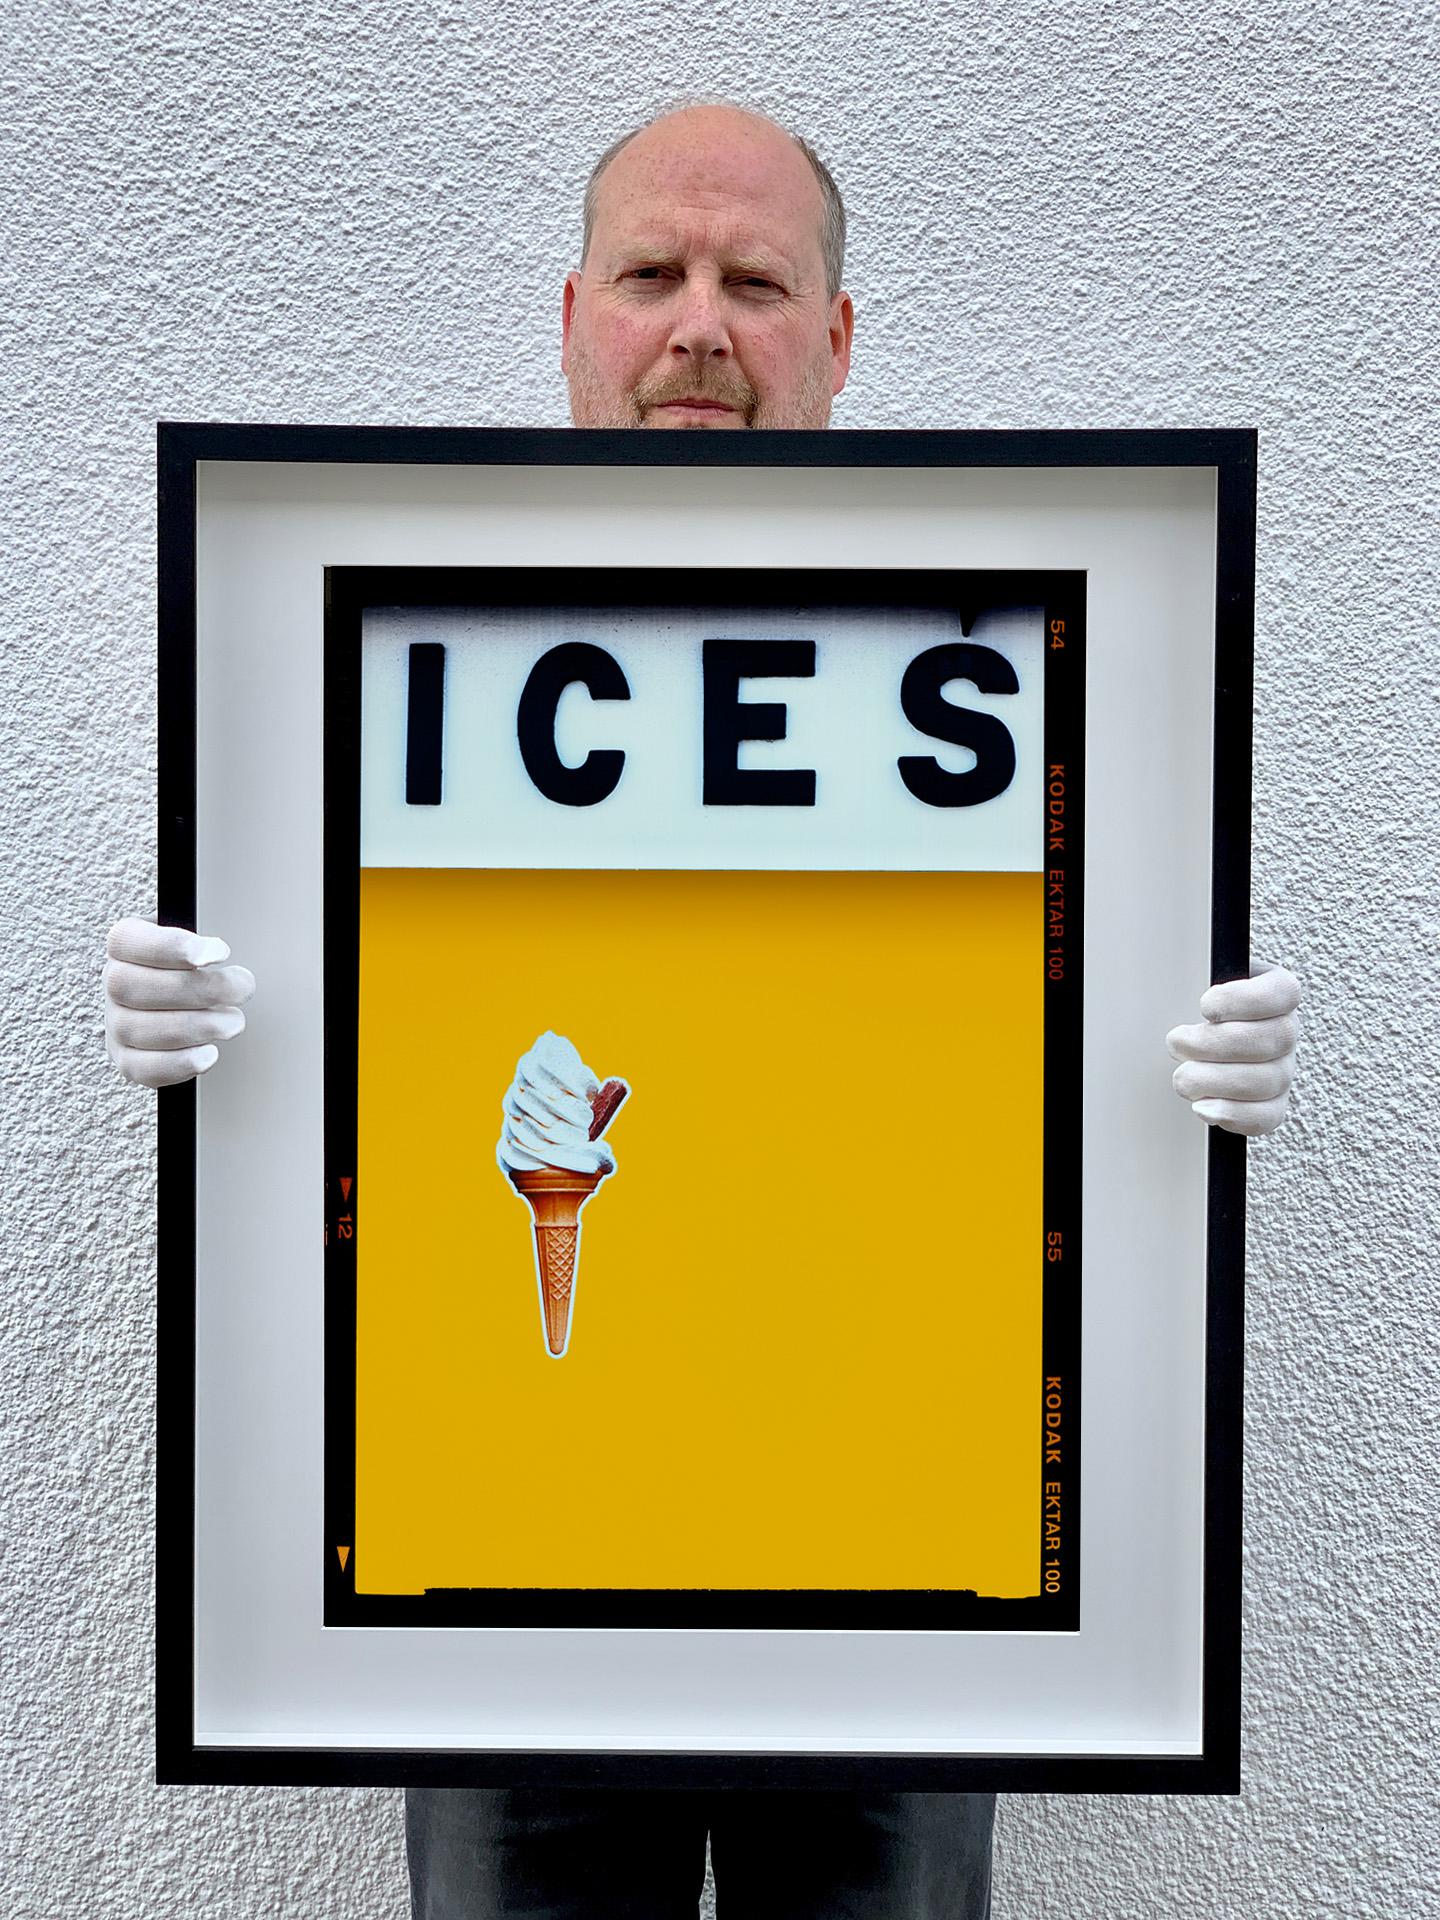 ICES, by Richard Heeps, photographed at the British Seaside at the end of summer 2020. This artwork is about evoking memories of the simple joy of days by the beach. The mustard yellow color blocking, typography and the surreal twist of the